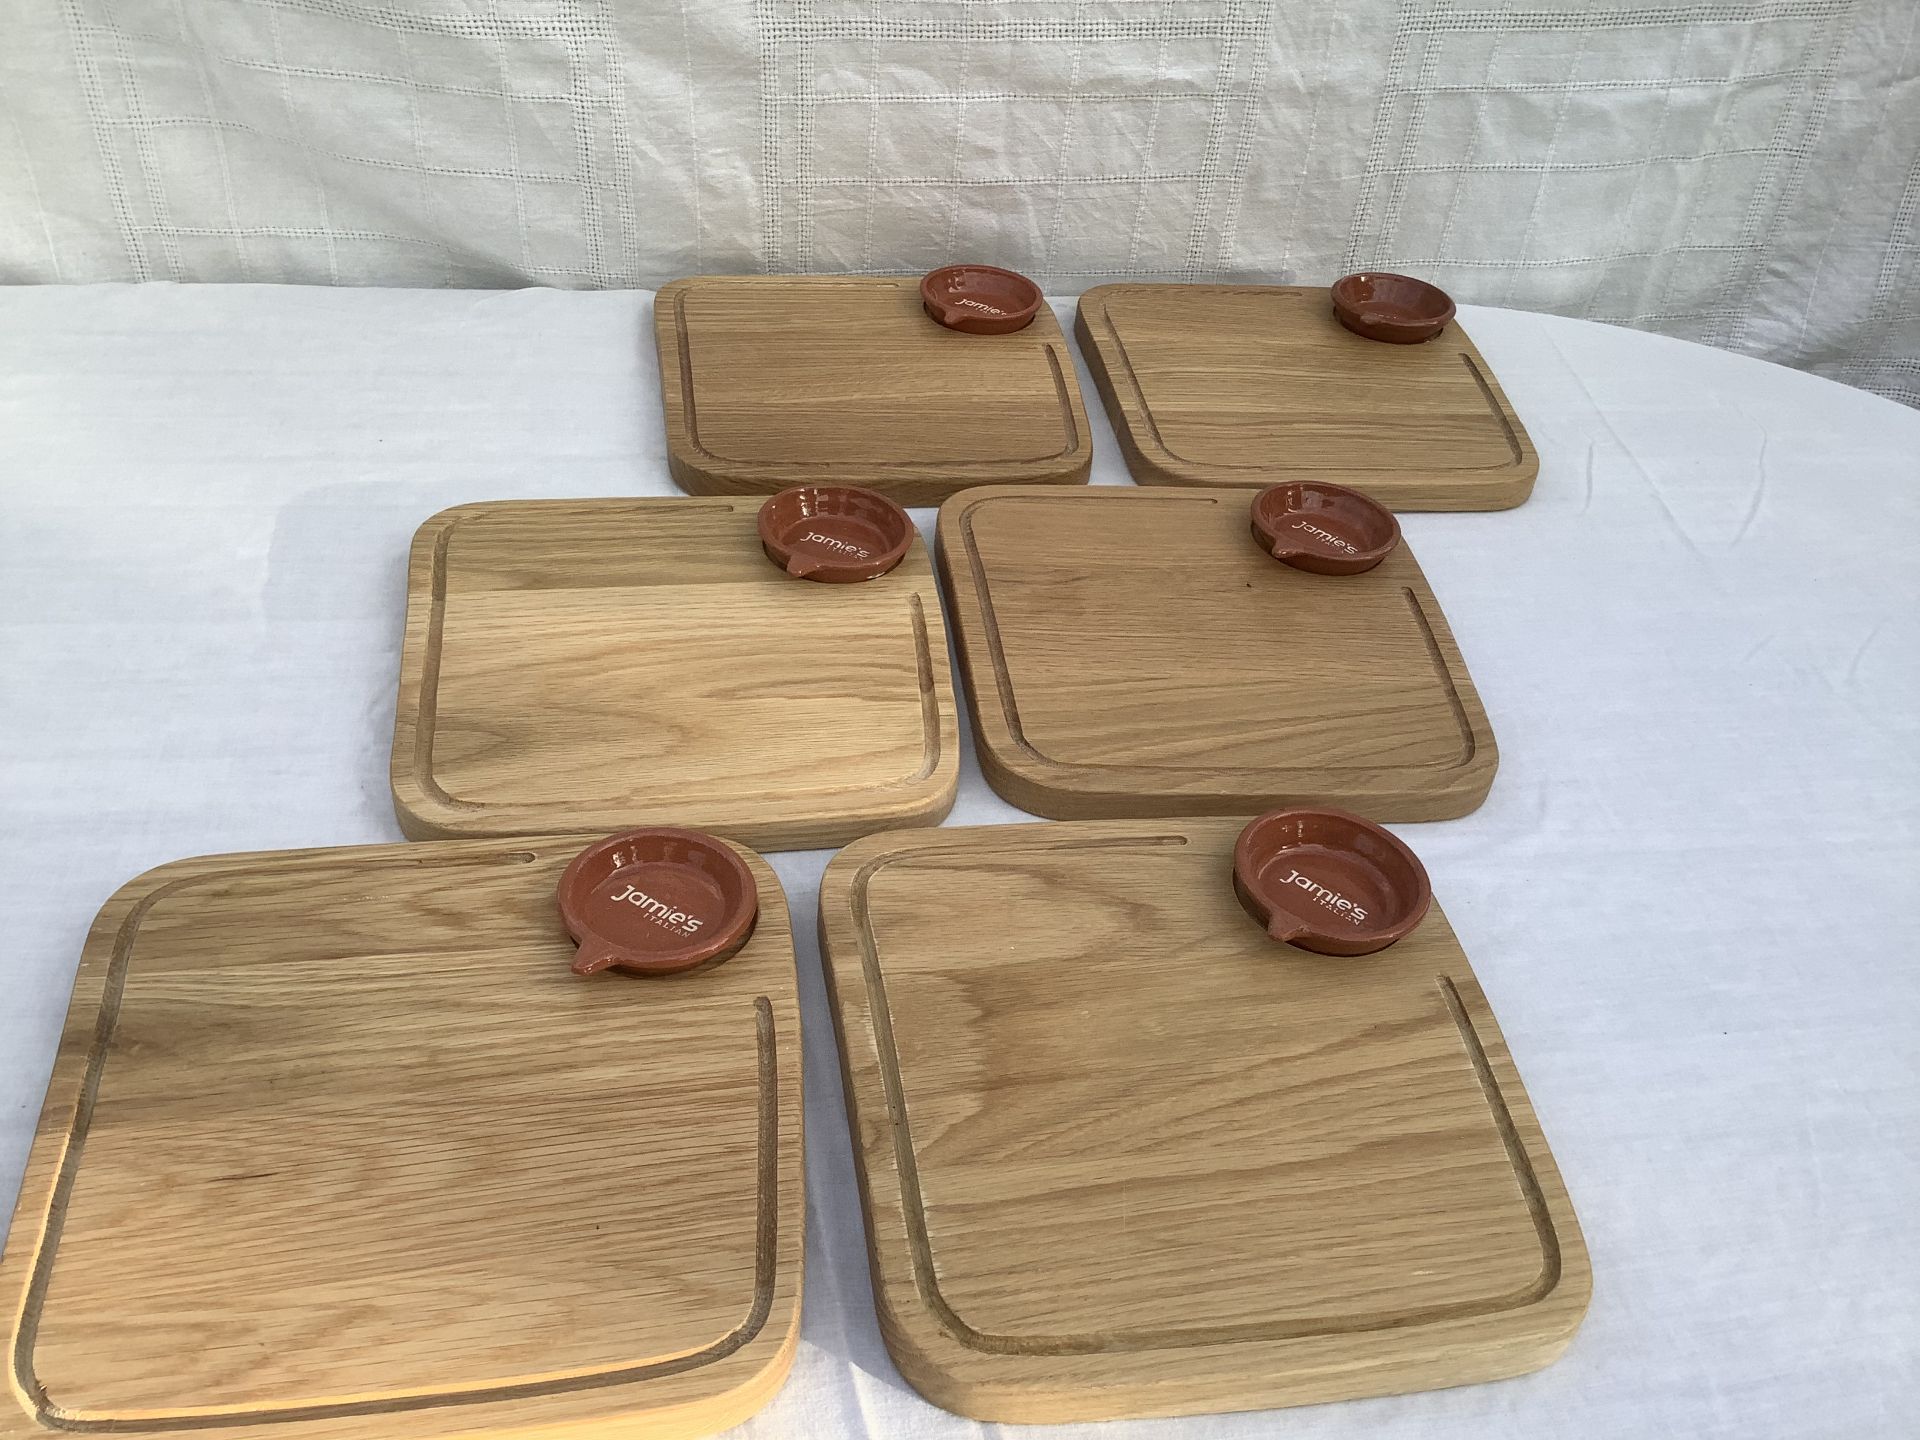 6 steak boards 25cm x 25cm with inderts for dipping dish plus 6 branded terracotta dipping dishes